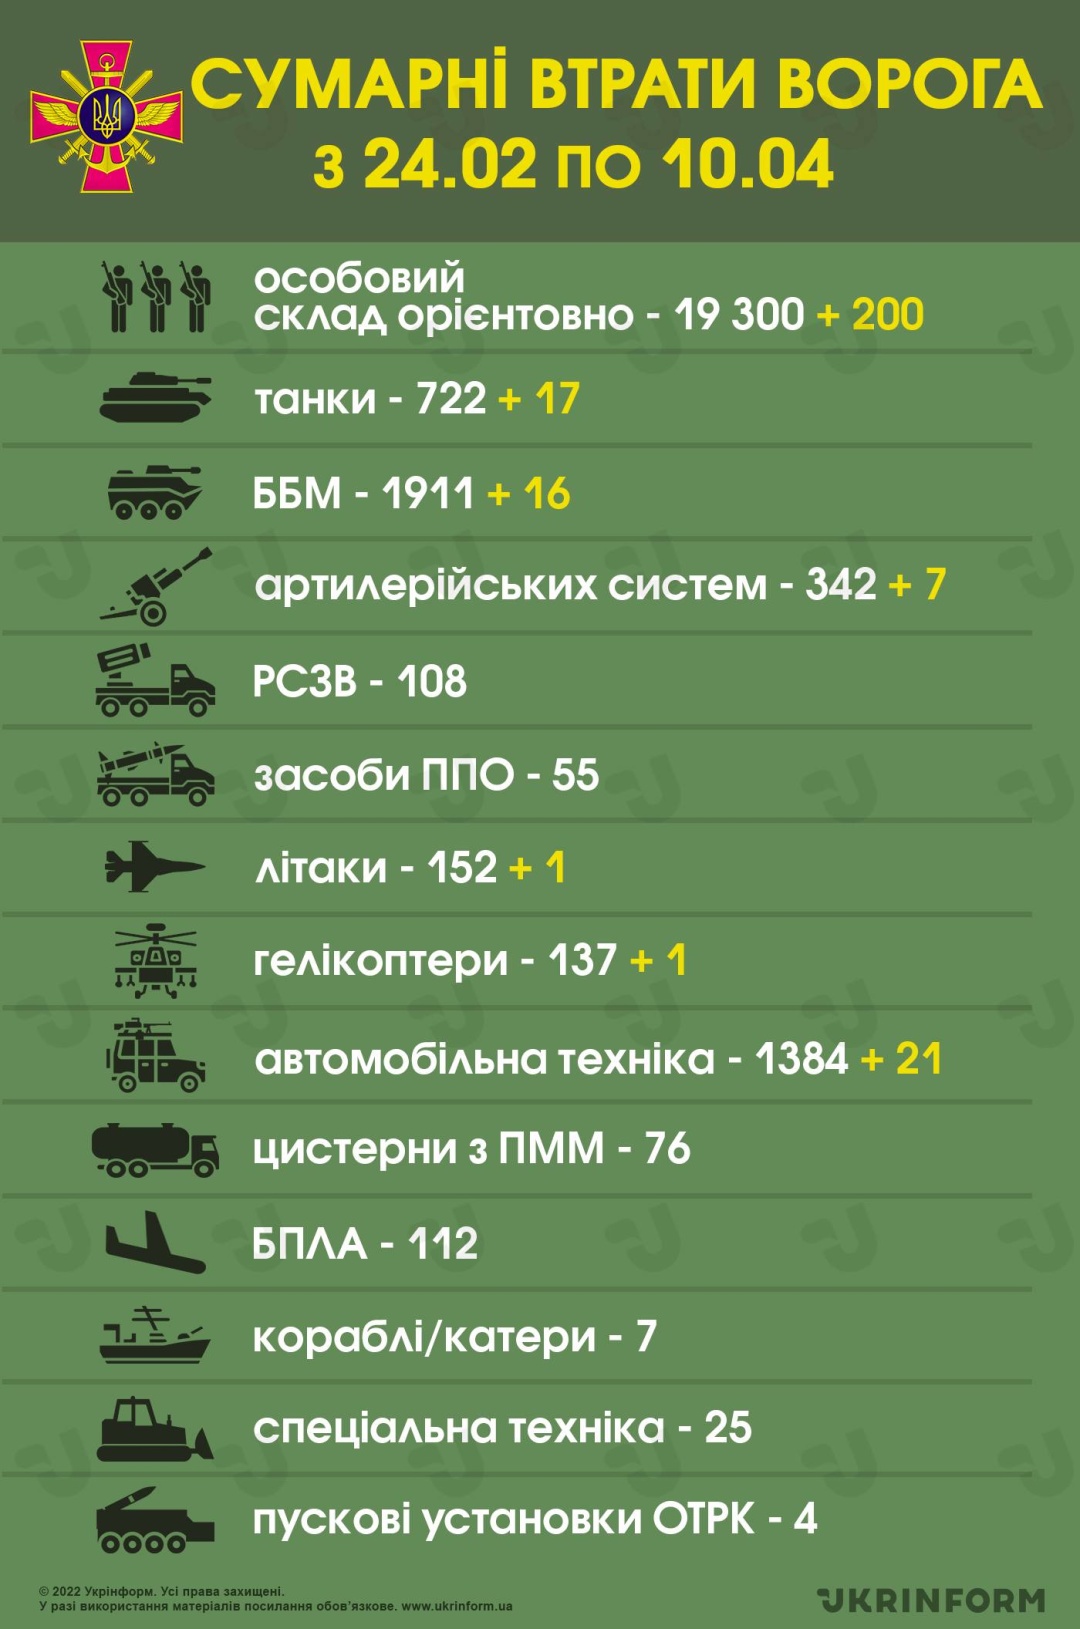 The Russian army lost 19,300 soldiers as of April 10